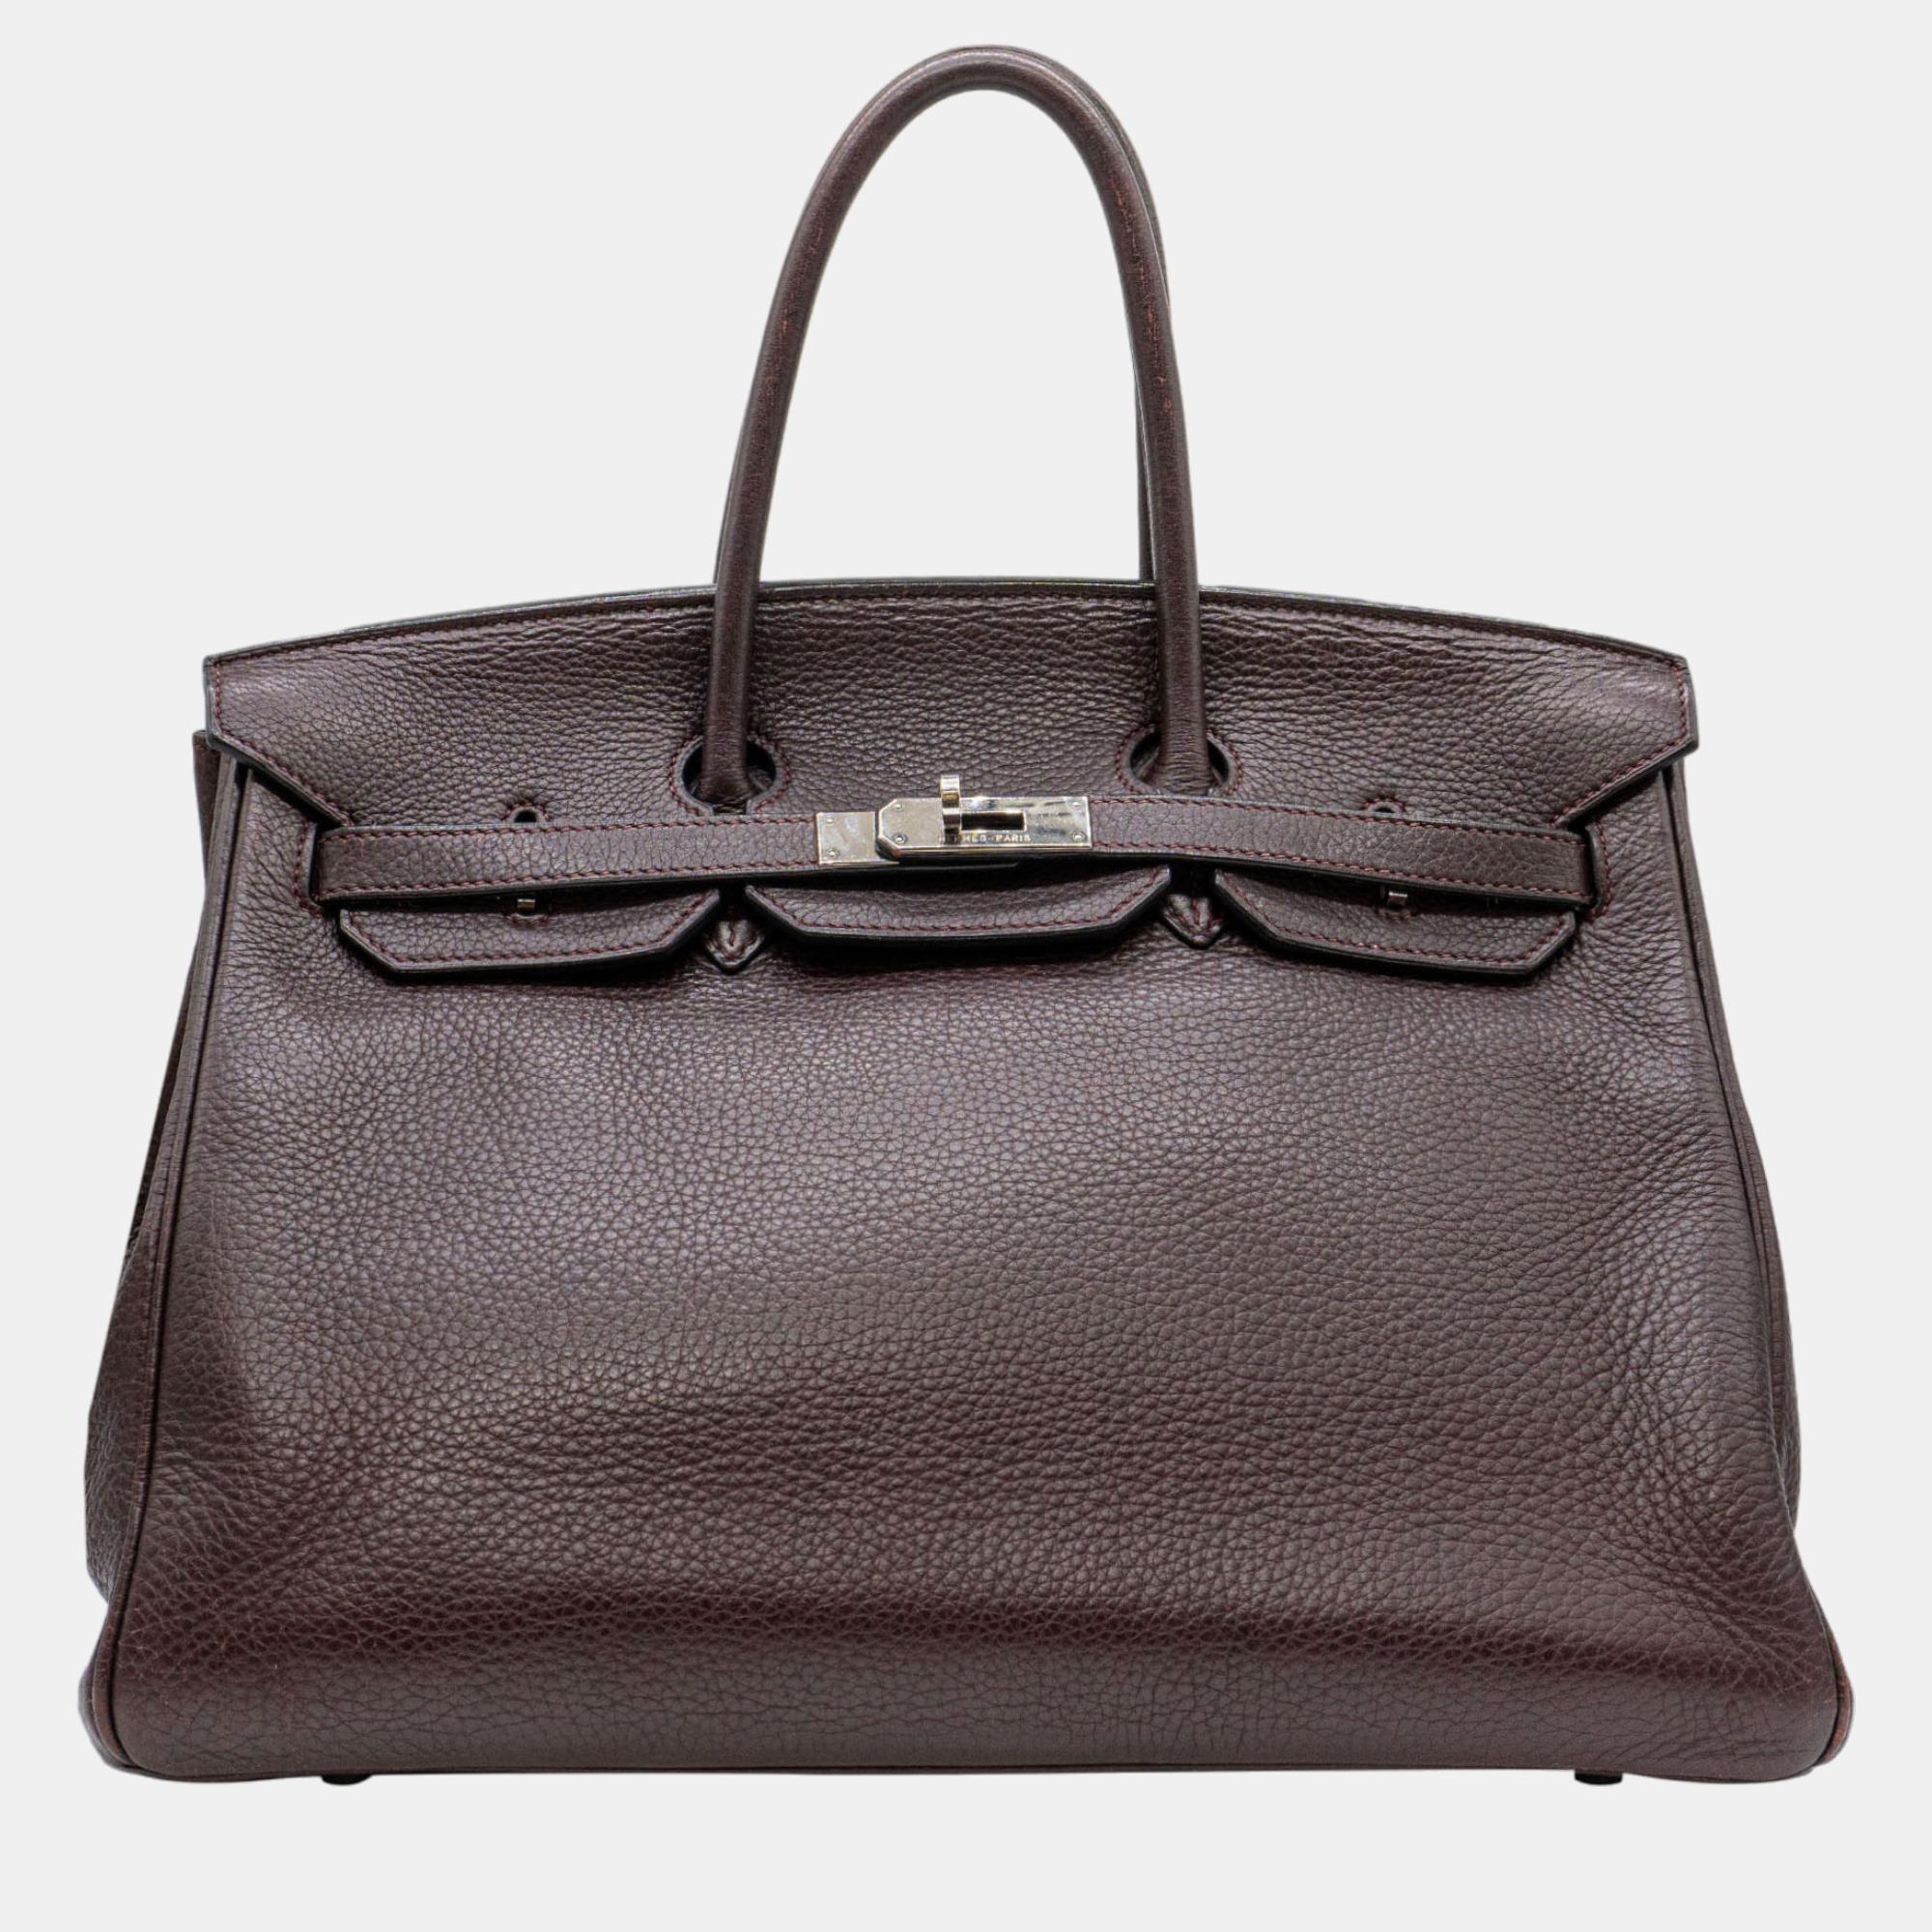 

Hermès Birkin 35 in Raisin Clemence Leather with PHW Bag, Brown